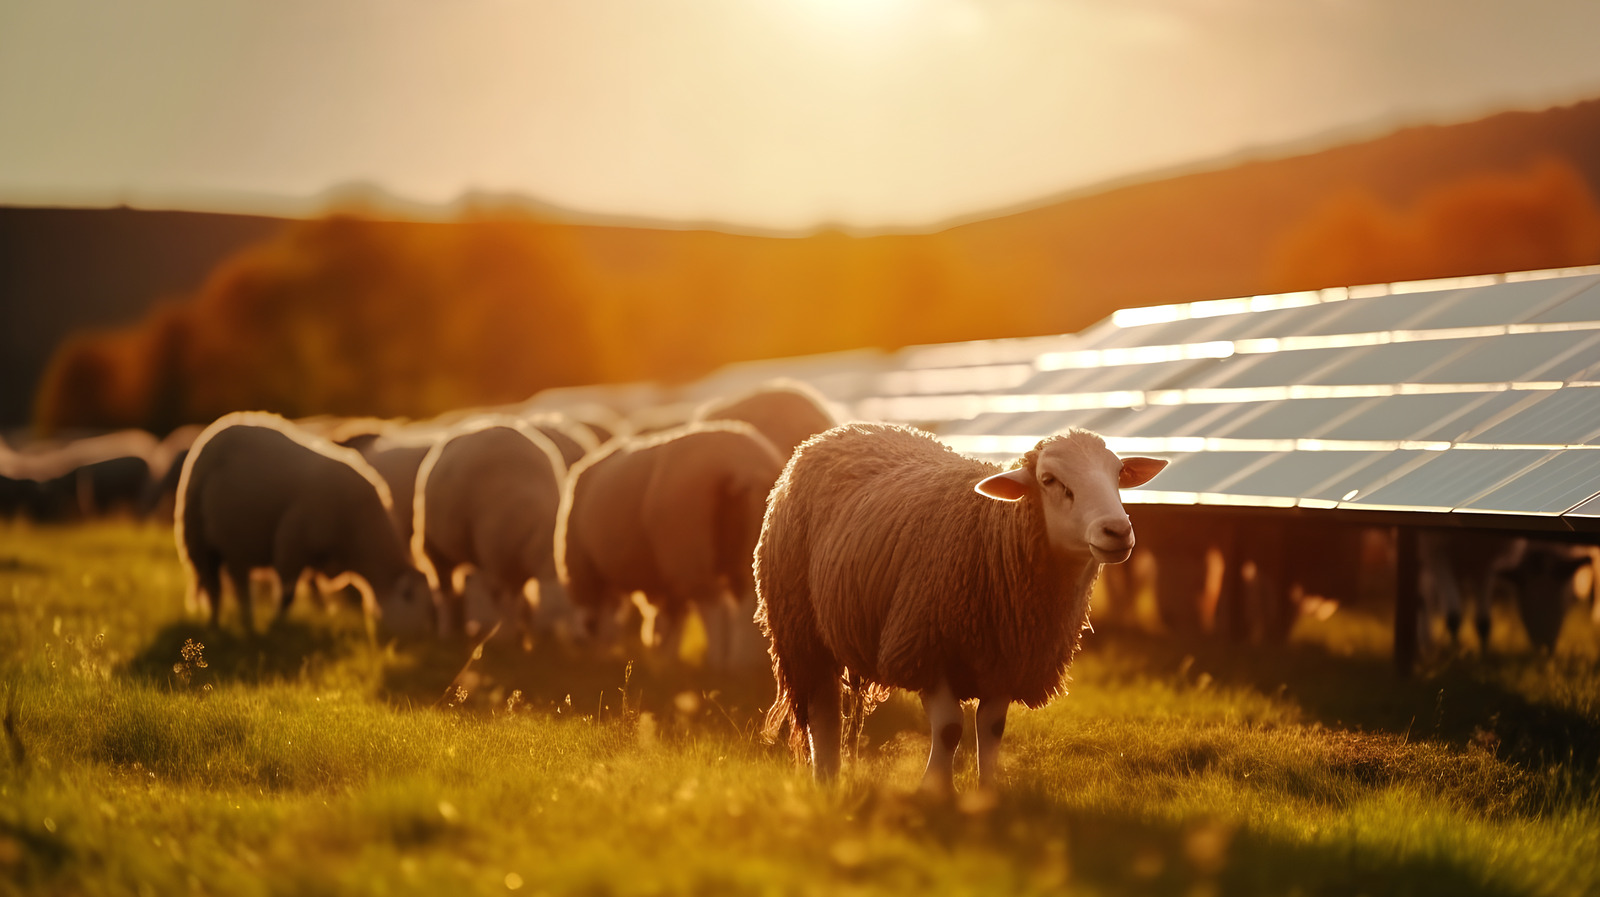 How Solar Vegetation Can Revitalize Rural Communities and Agriculture - Sheep-Friendly Solar Vegetation Plantings 